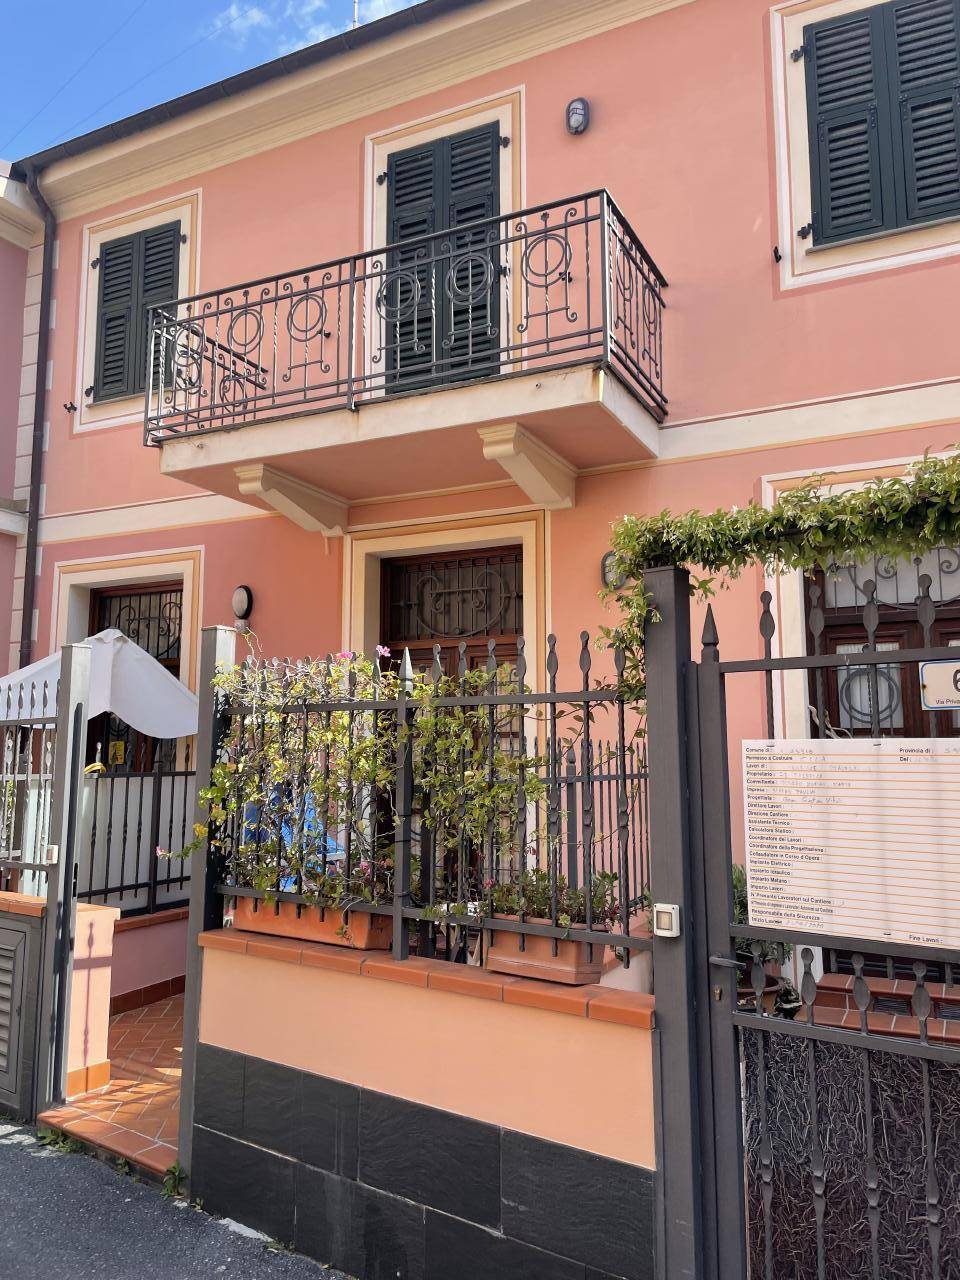 70 M² House ∙ 2 Bedrooms ∙ 4 Guests - Alassio